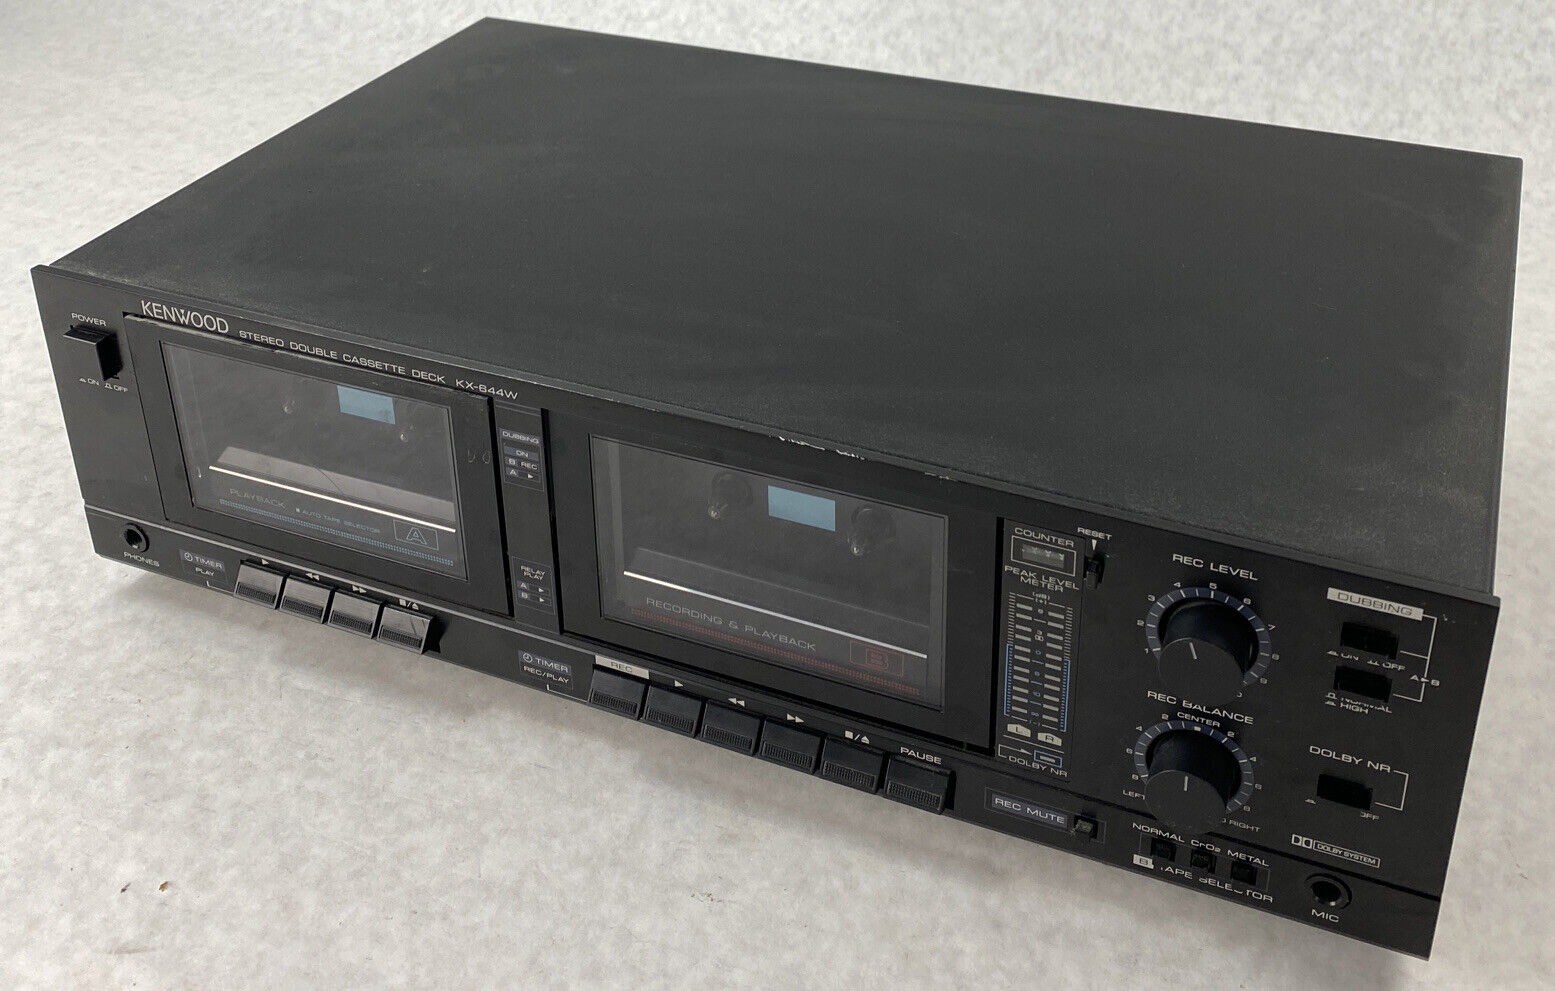 Kenwood KX-644W Dual Tape Recording Playback Stereo Double Cassette Deck PARTS